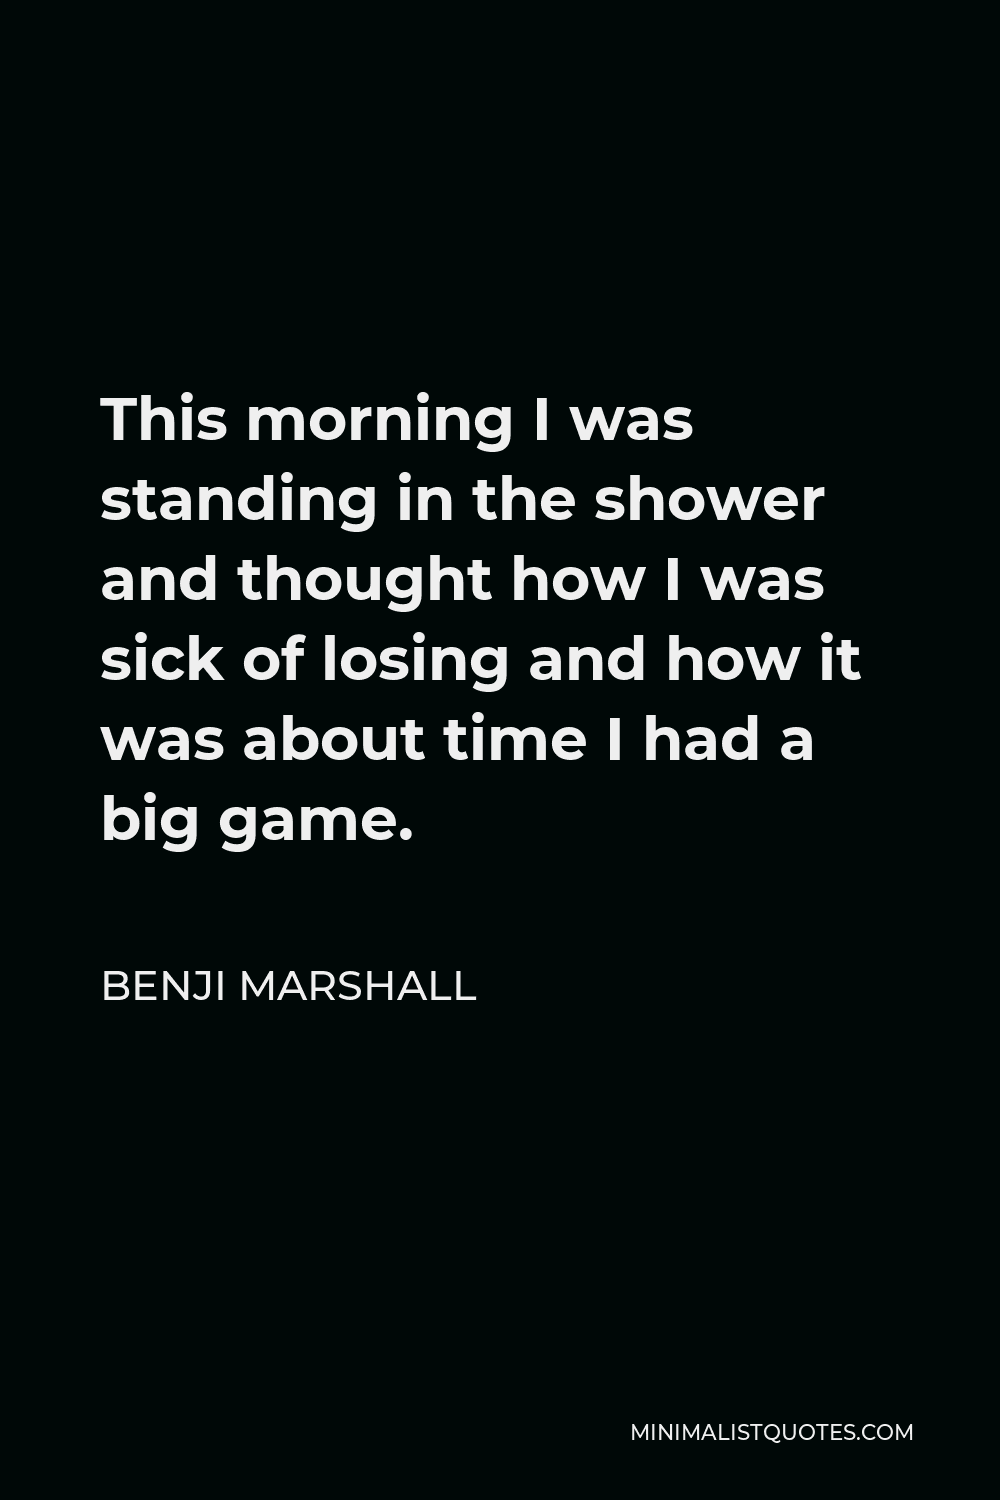 Benji Marshall Quote - This morning I was standing in the shower and thought how I was sick of losing and how it was about time I had a big game.